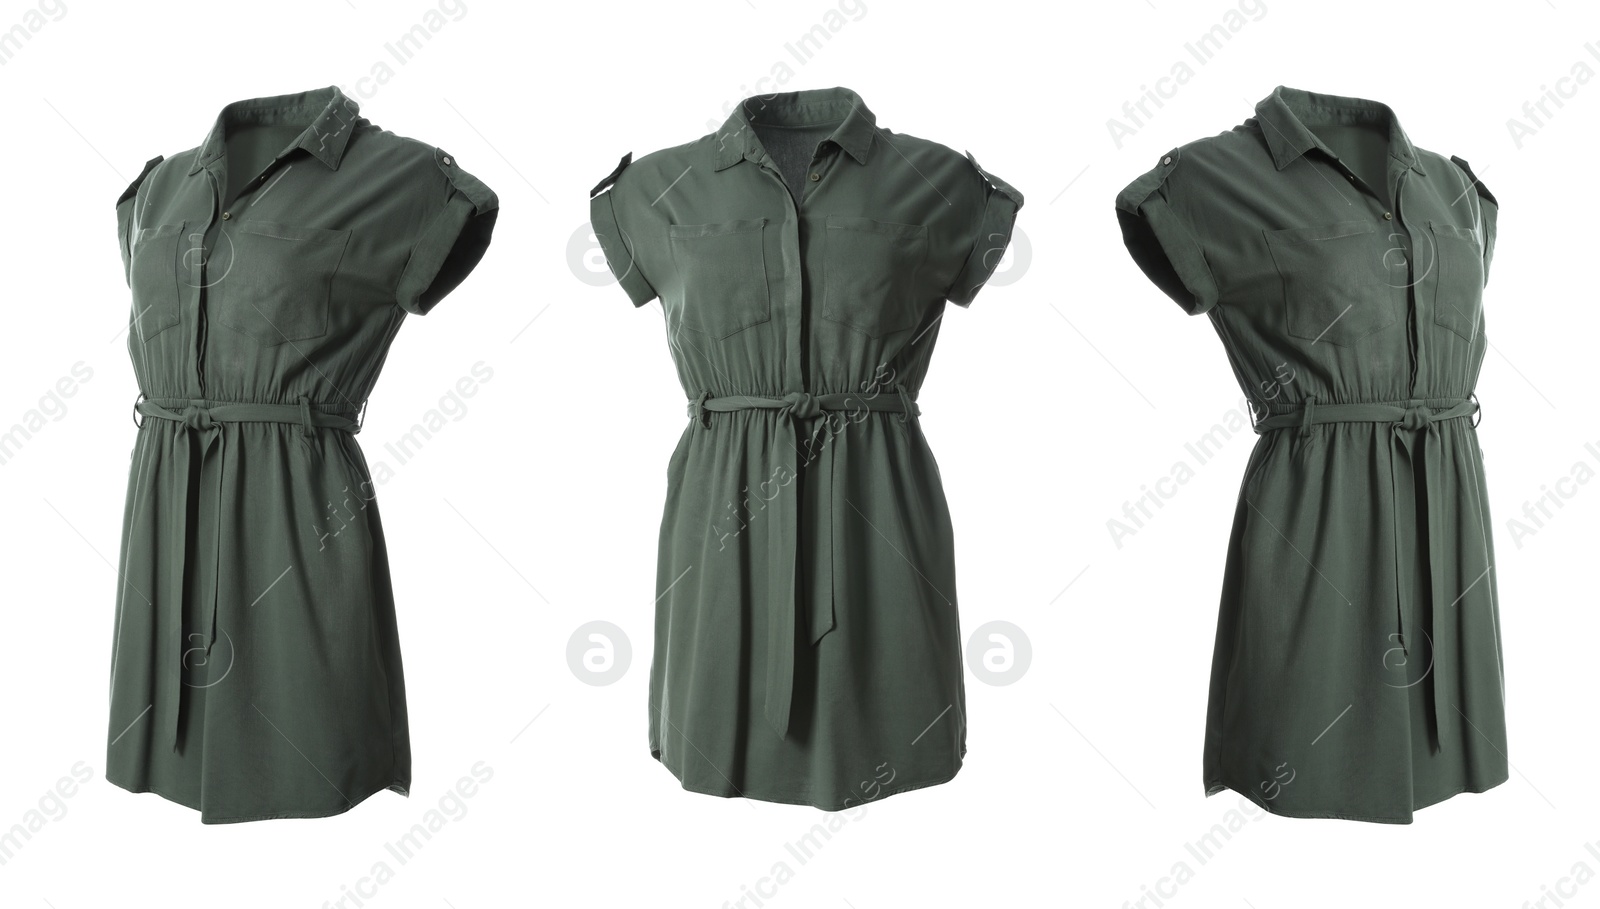 Image of Set of stylish grey shirt dresses from different views on white background